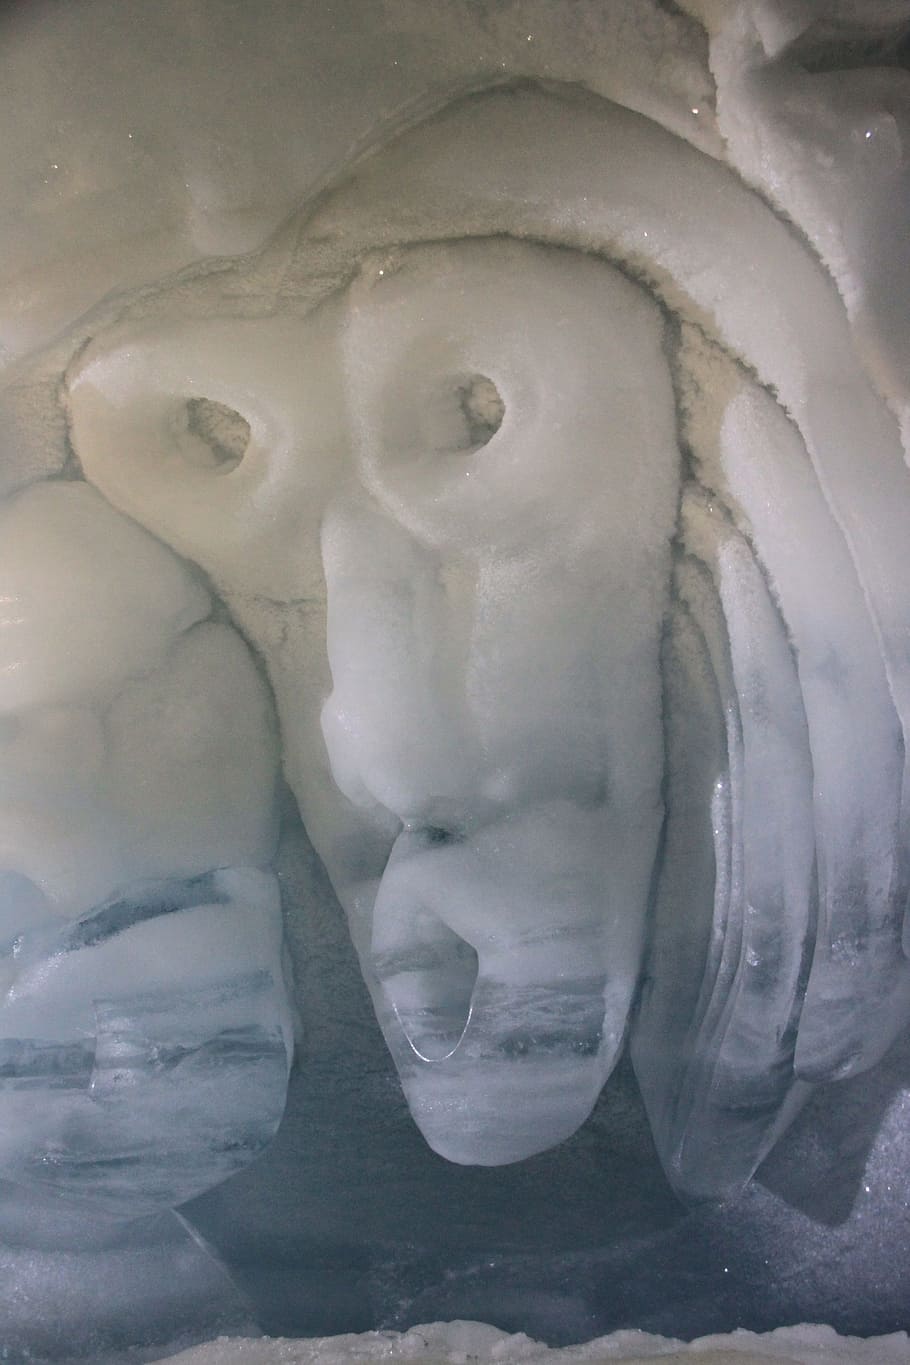 sculpture, ice, frozen, cold, winter, carving, ze, shape, intricate, scenic